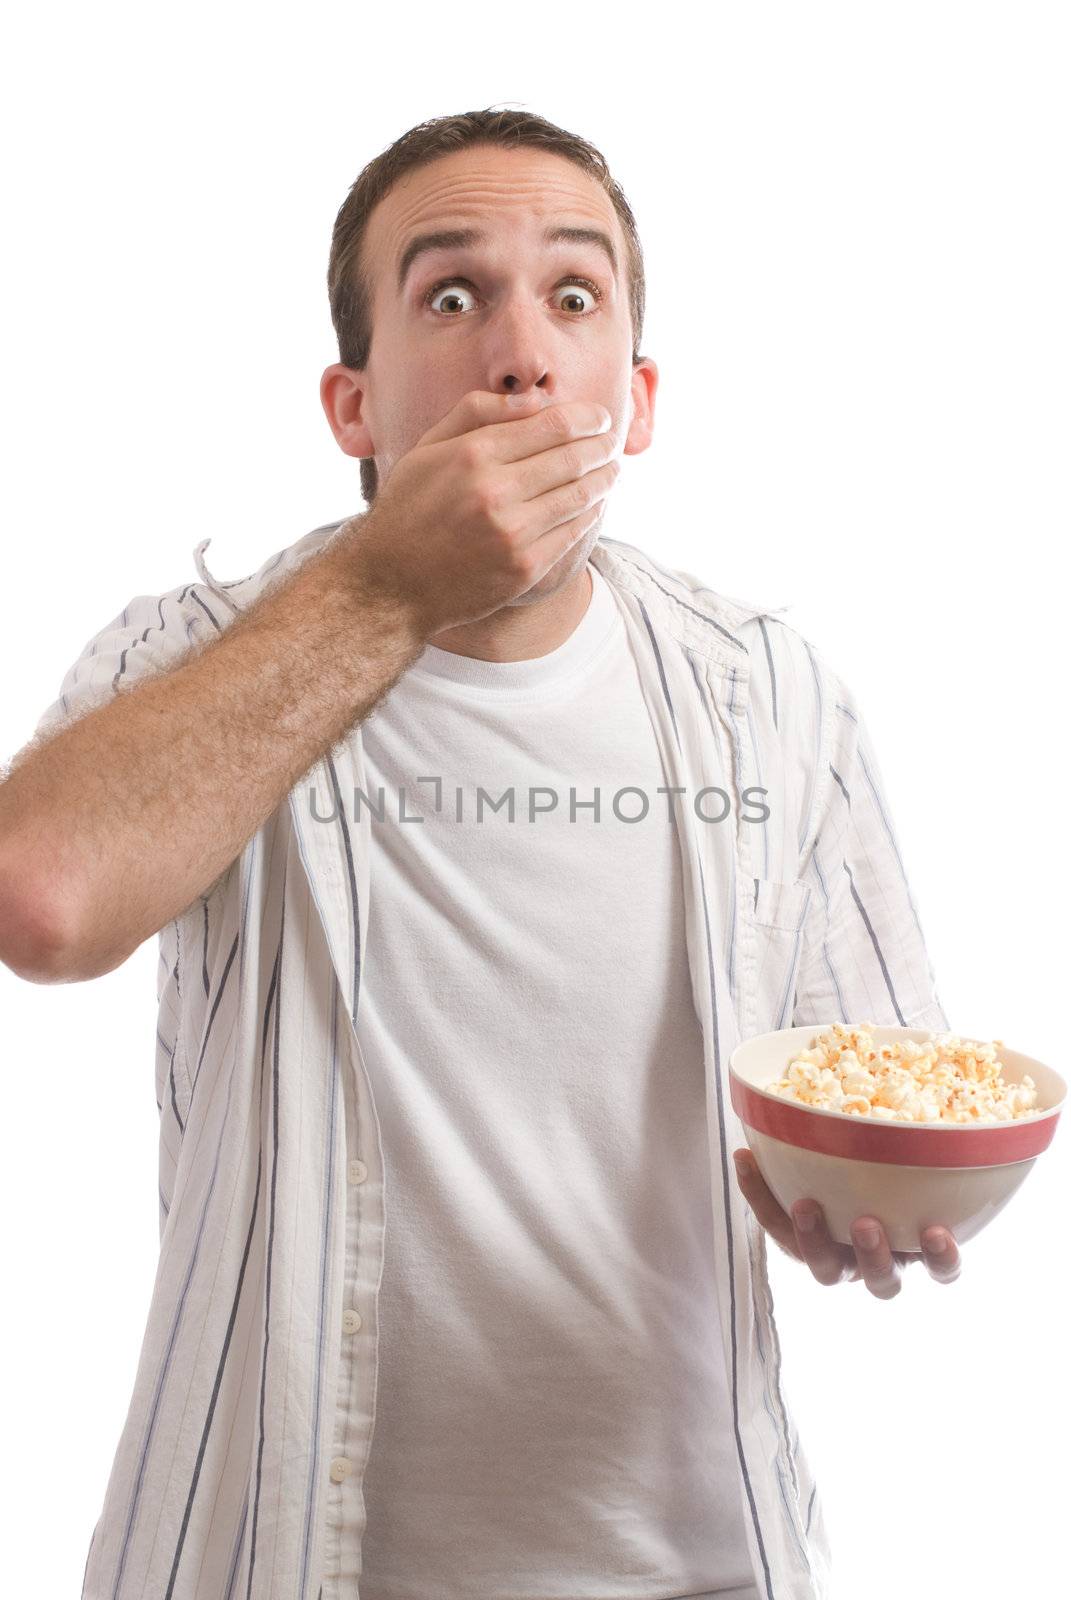 A man eating handfulls of popcorn from a bowl, isolated against a white background